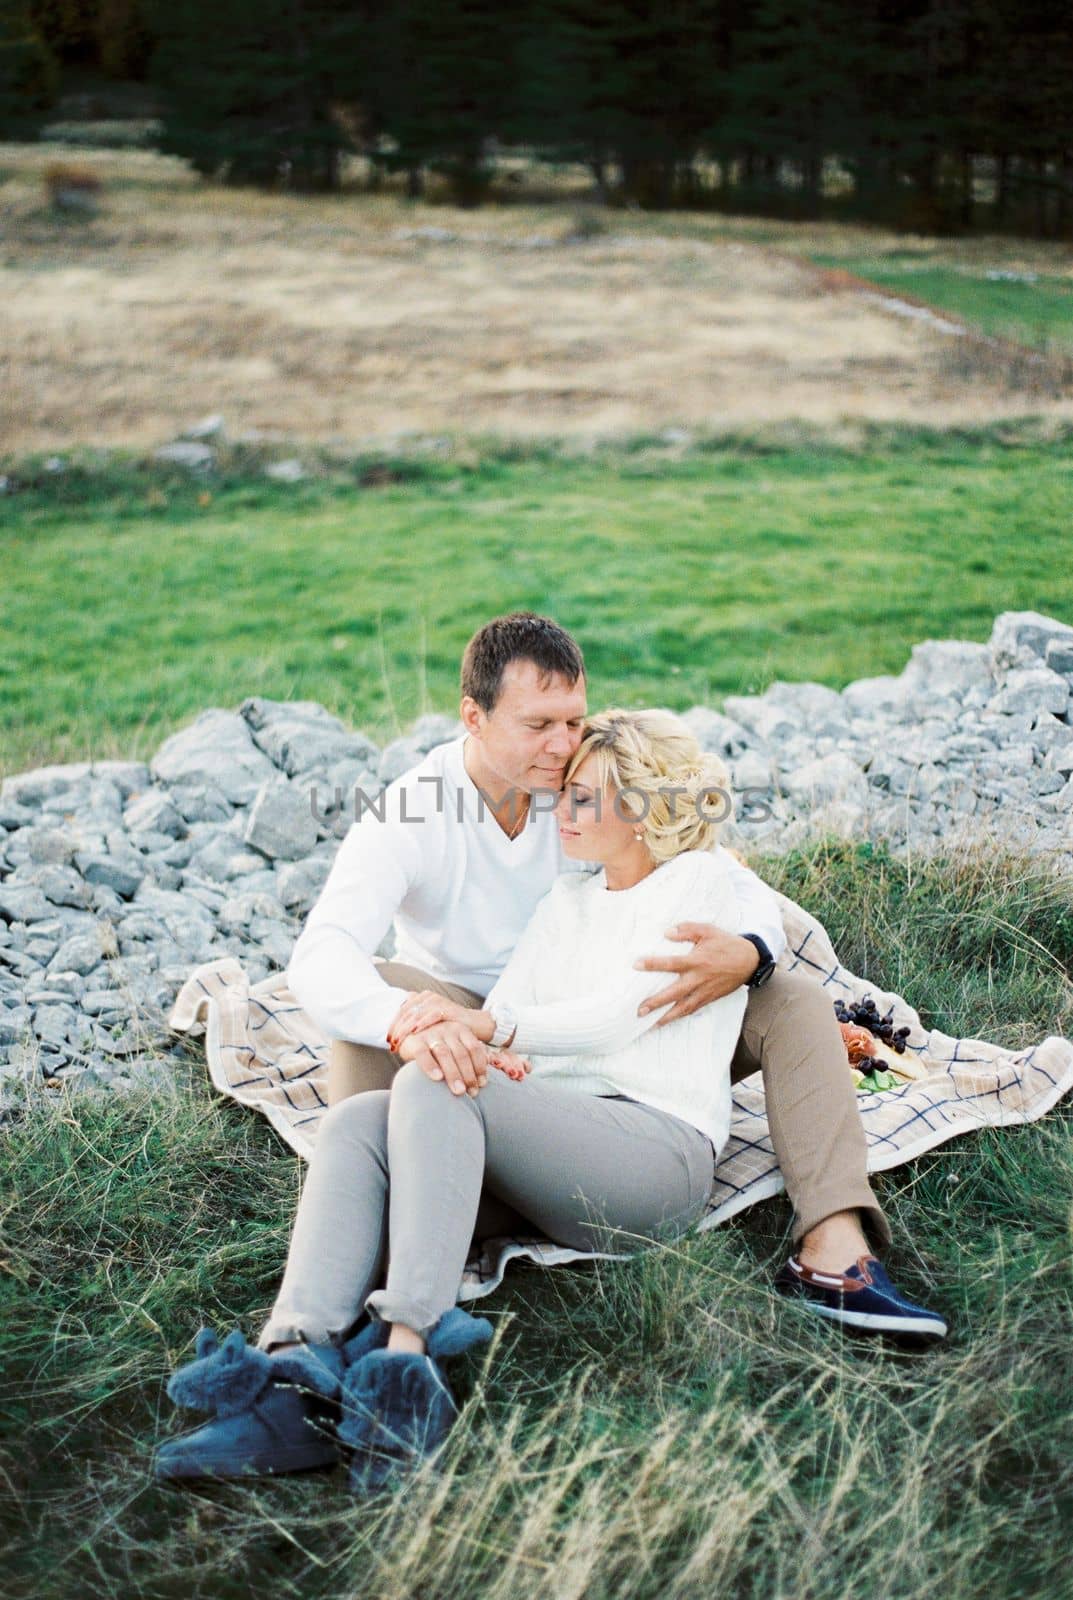 Man hugs woman leaning back against him while sitting on a blanket on the lawn. High quality photo